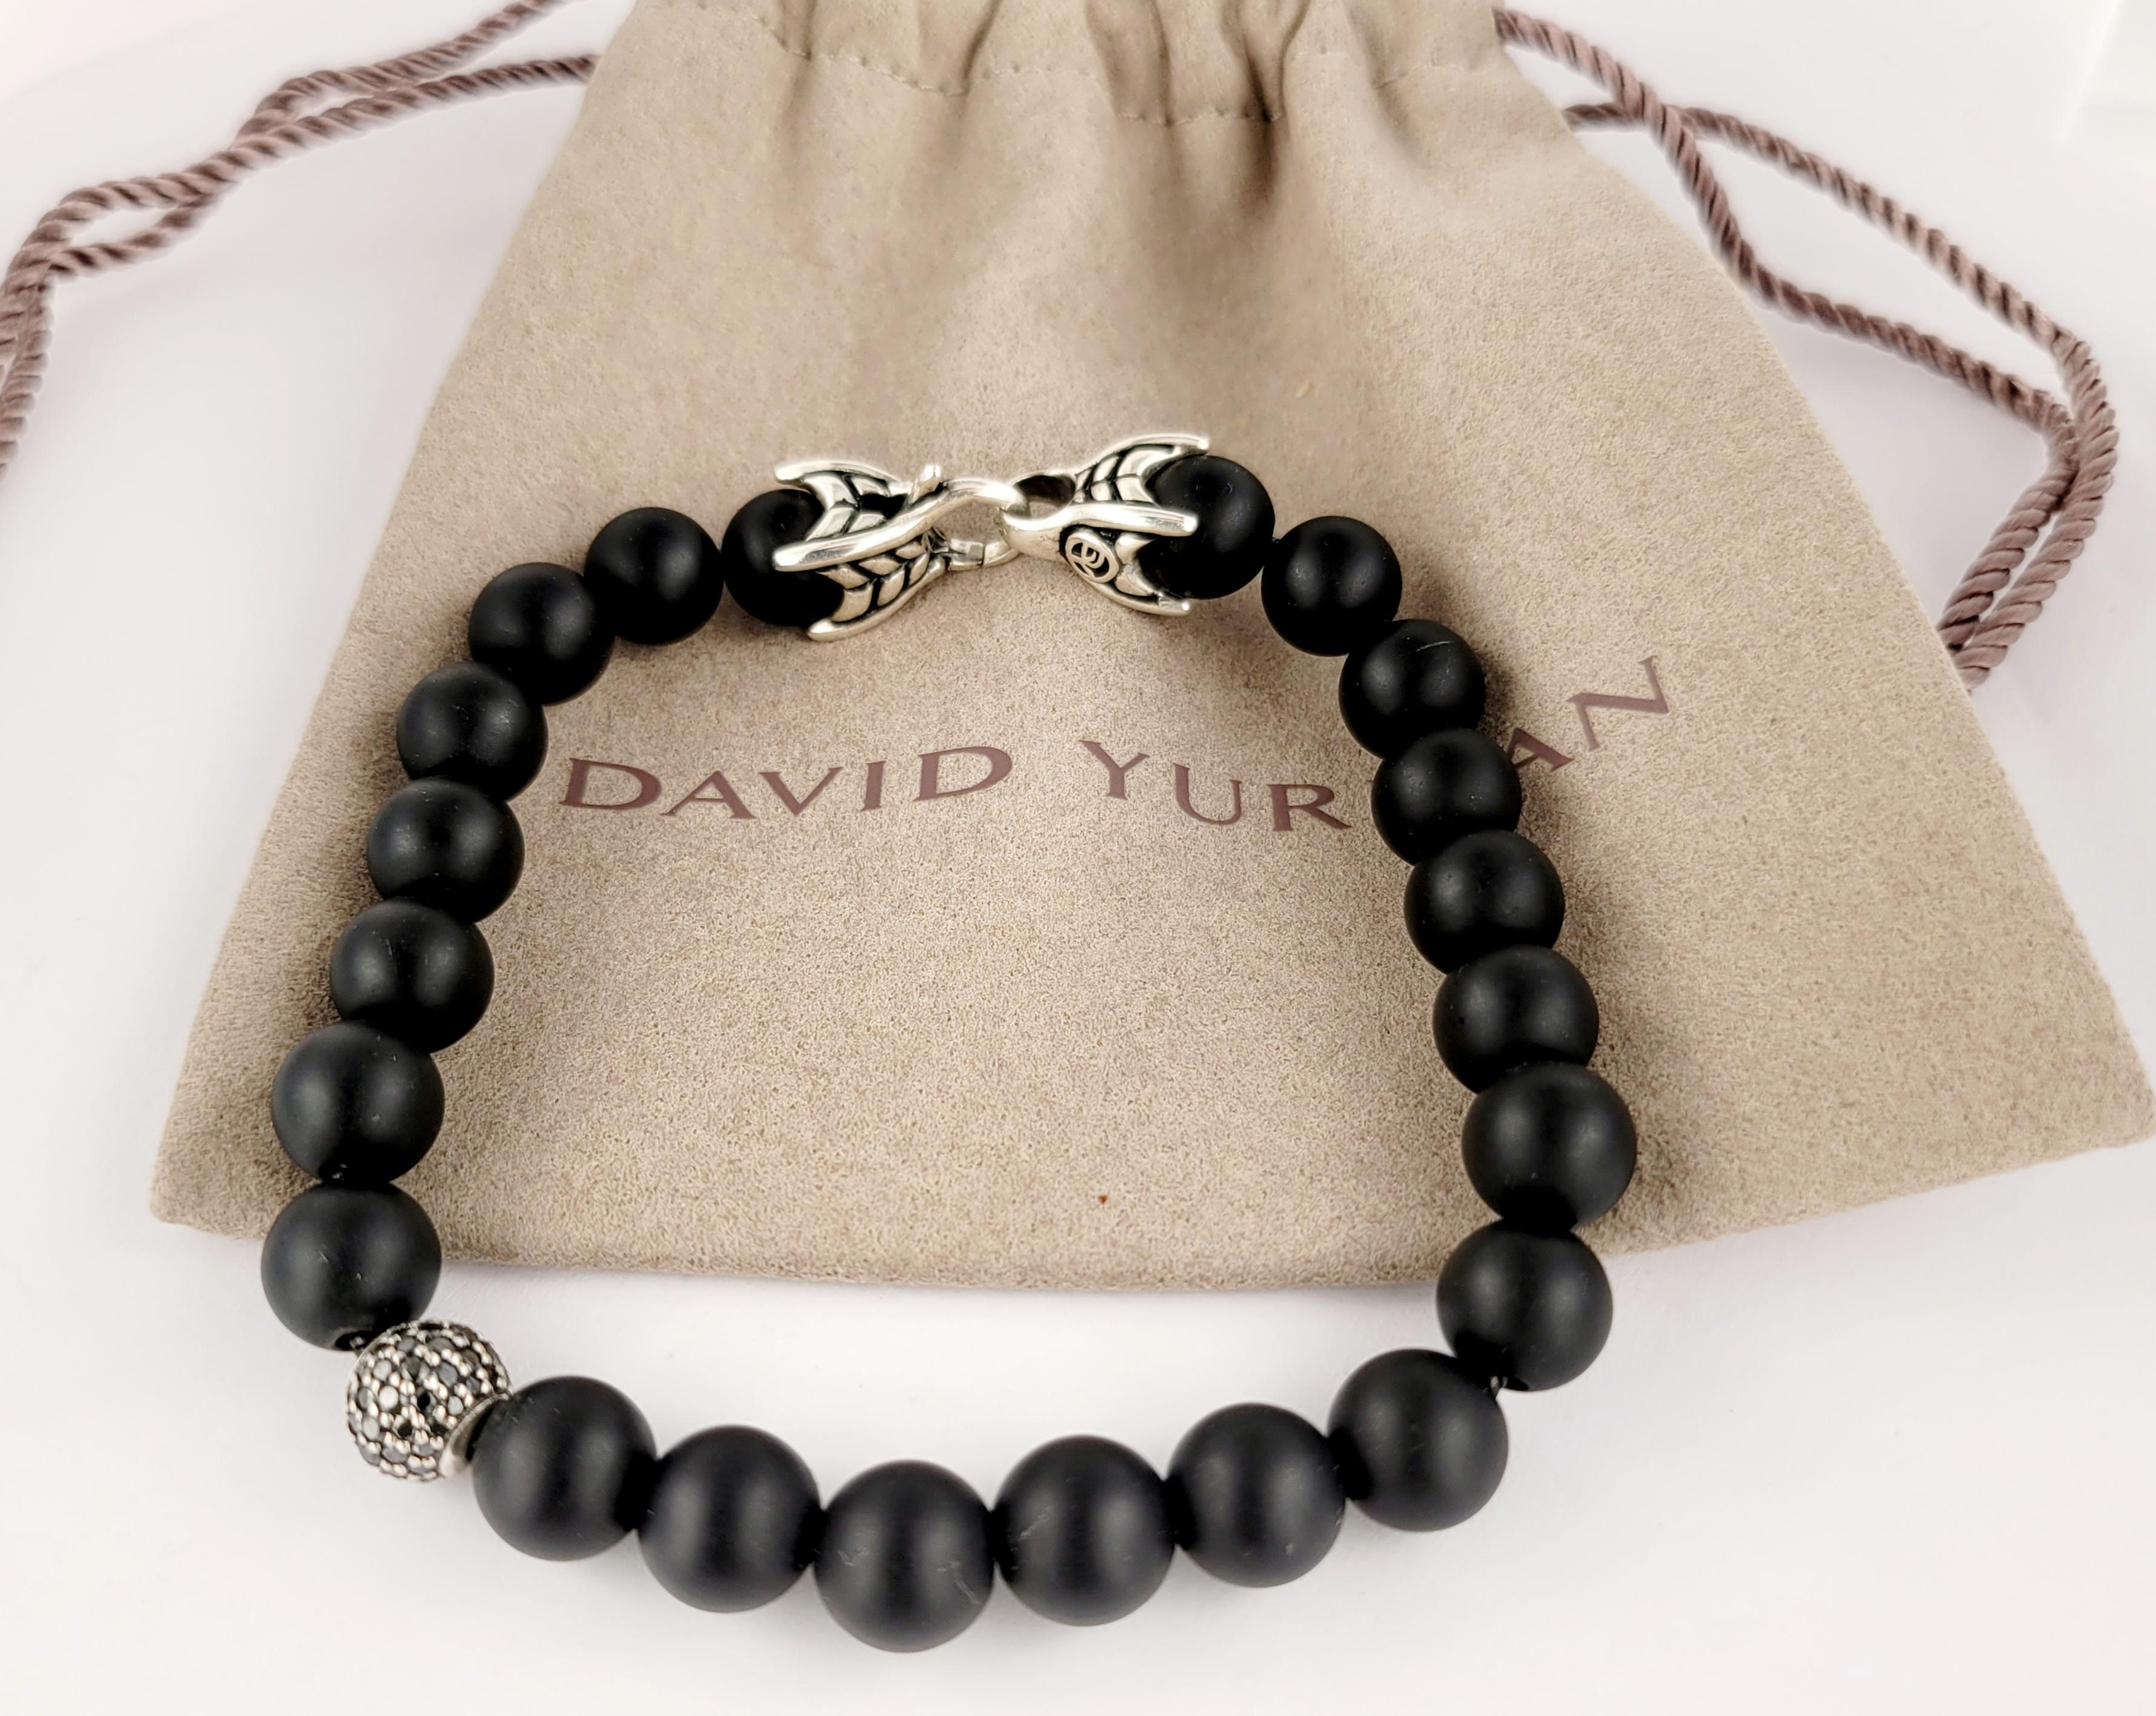 David Yurman Spiritual Beads Bracelet
Material Sterling Silver 
Metal Purity 925
Pave-set black diamonds, 0.82 total carat weight
Bracelet Width 8mm
Bracelet Length 8'' Long from end to end''
Bracelet Weight 23.7gr
Condition New, never worn 
Comes